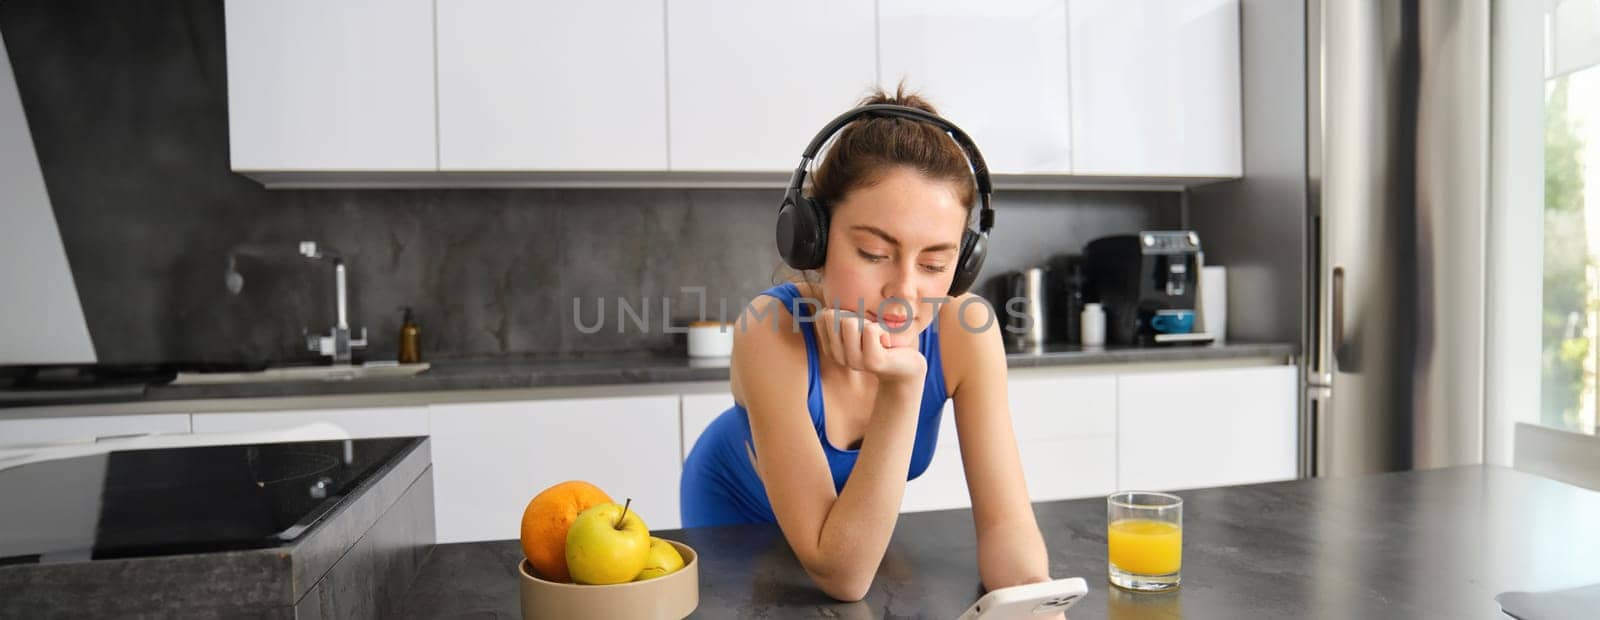 Portrait of young fitness woman with headphones, drinking orange juice in kitchen and using smartphone, listening music, getting ready for workout gym.